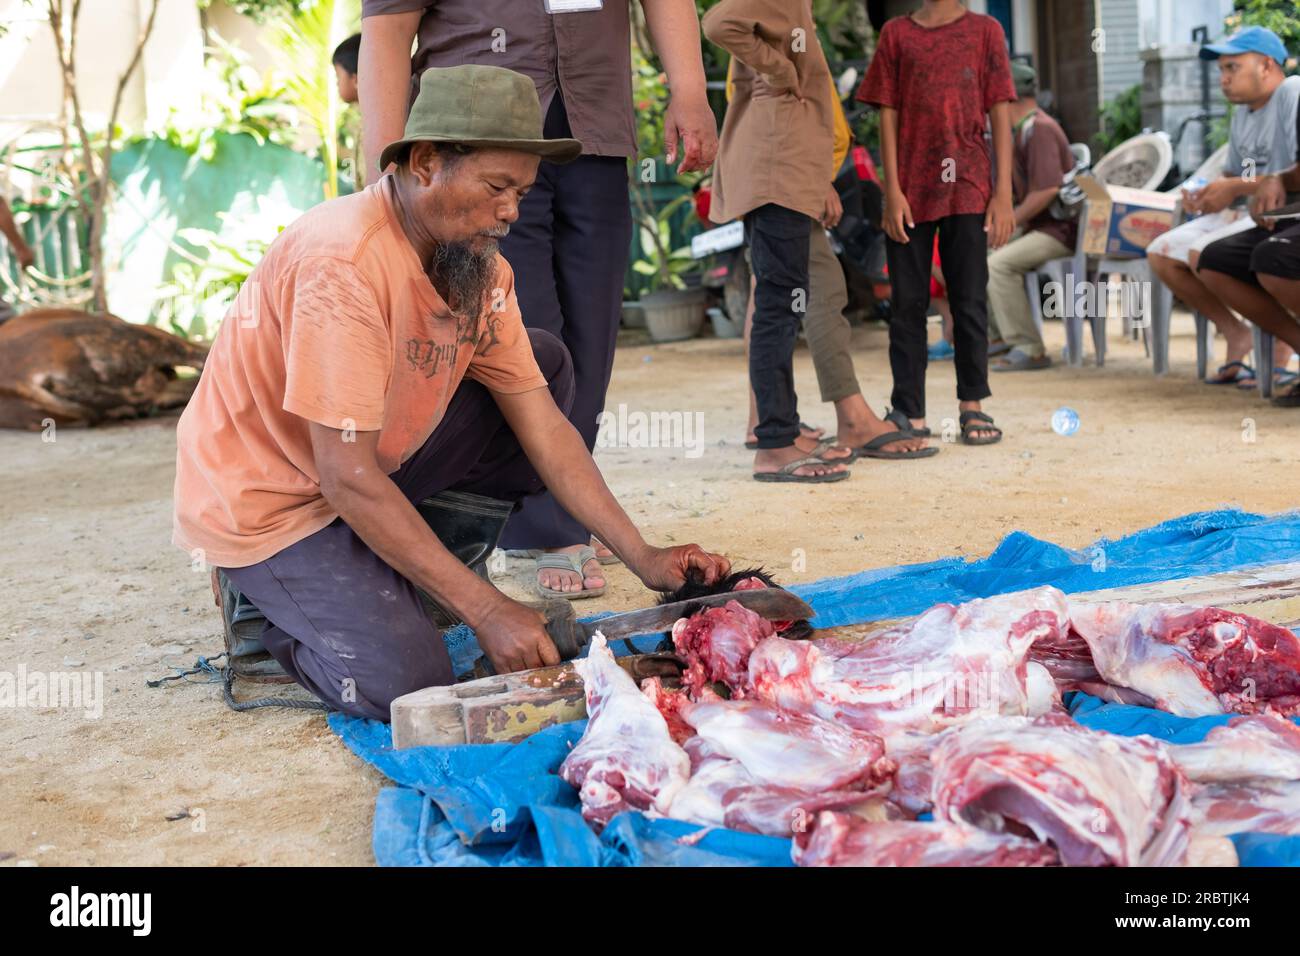 Lampung, Indonesia, 29 June 2023: Unknown Indonesian Muslims help each other to slaughter halal sacrificial animals during Eid al-Adha Stock Photo